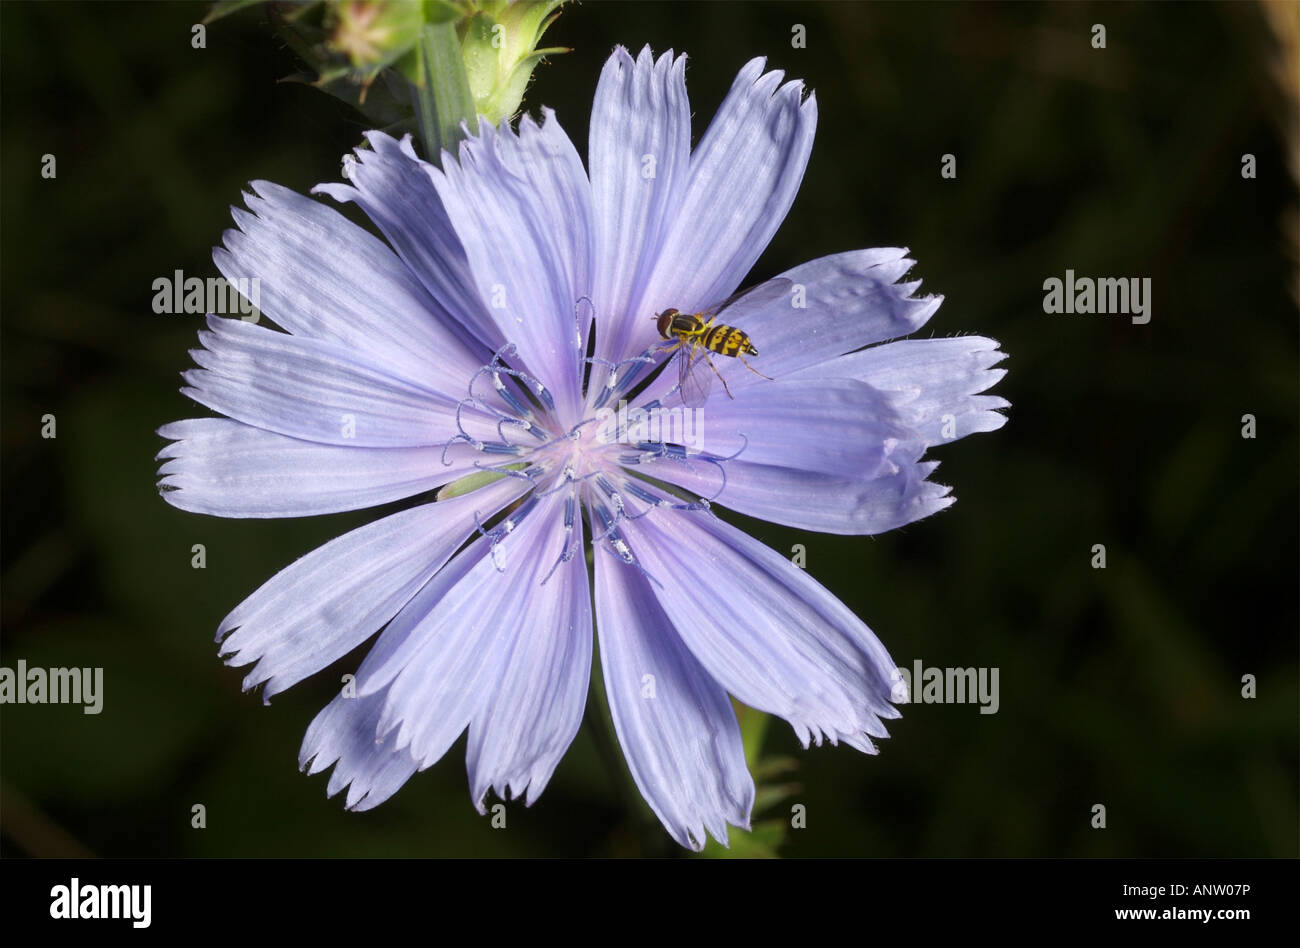 Germinating fly Toxomerus geminatus syrphid fly on a chickory flower Stock Photo